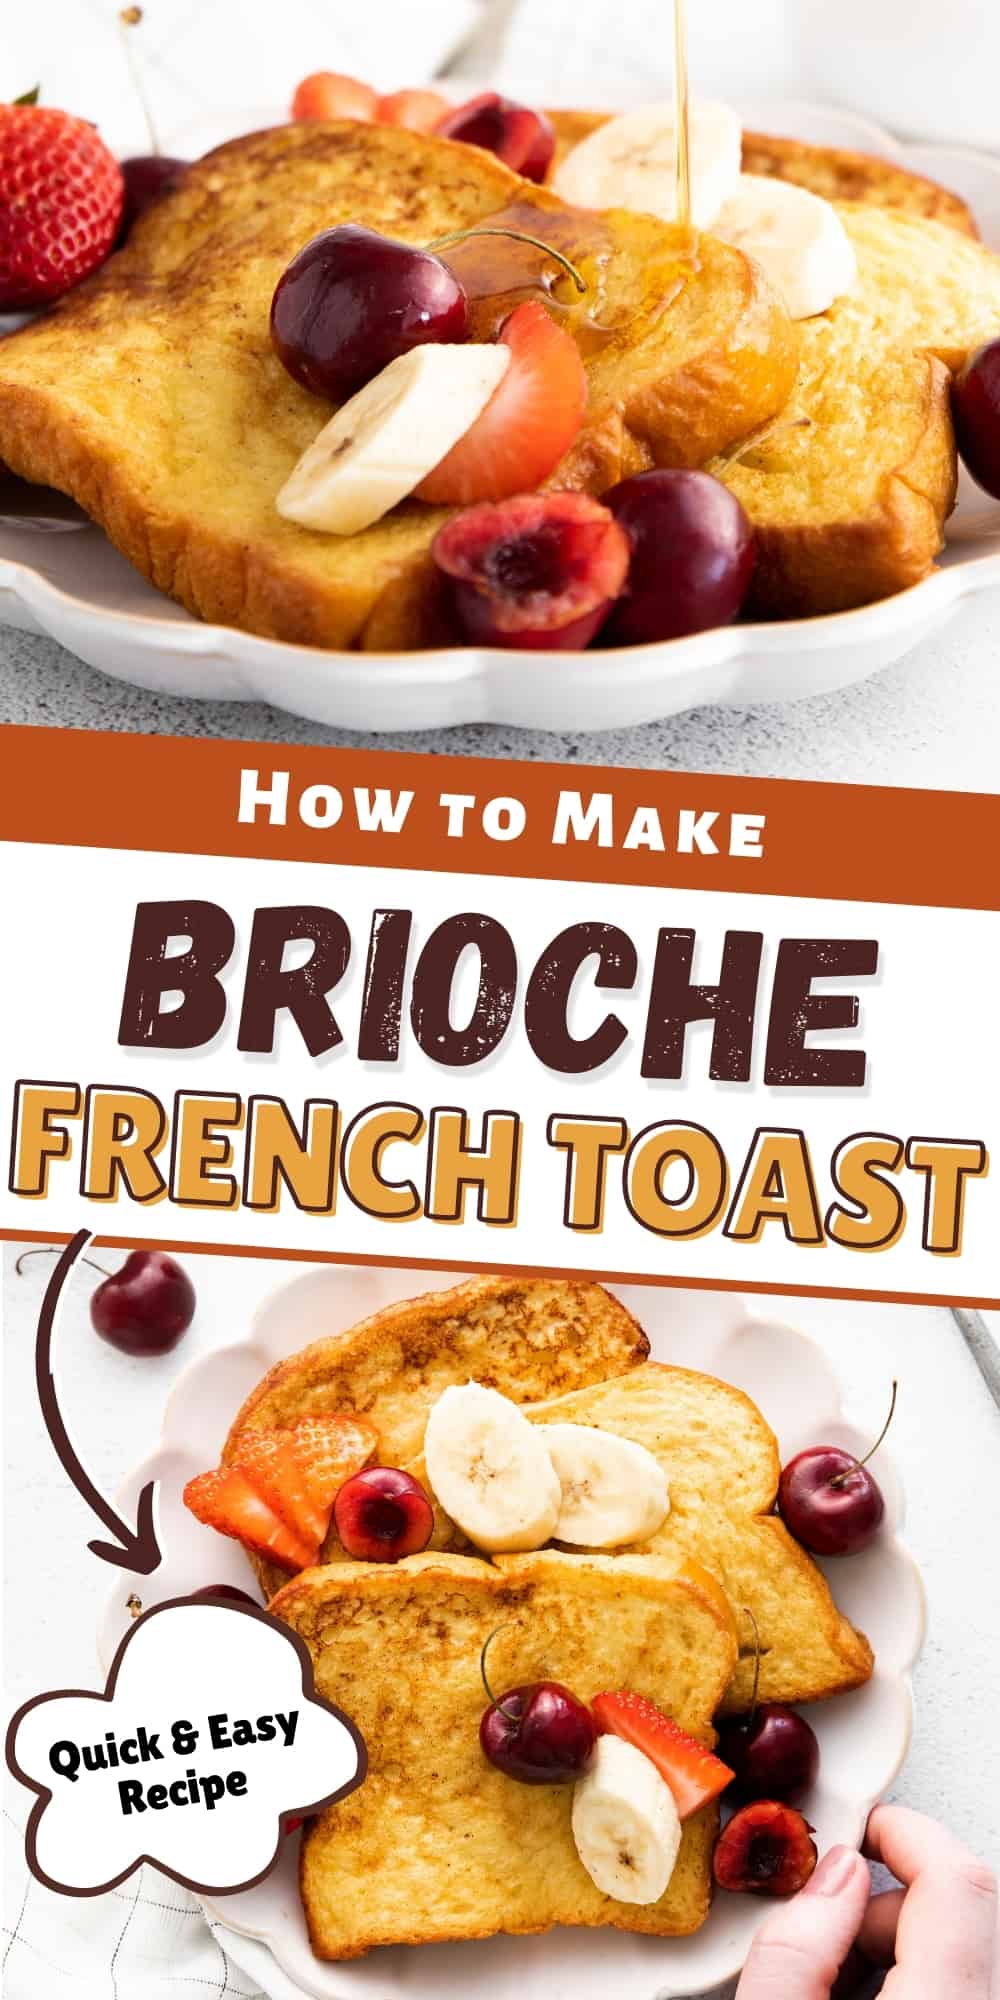 Reads: How to Make Brioche French Toast; Quick & Easy recipe. Top image shows side view of finished french toast on plate with fresh fruit and bottom image shows top down view of plated french toast, with a hand reaching out to grab the plate